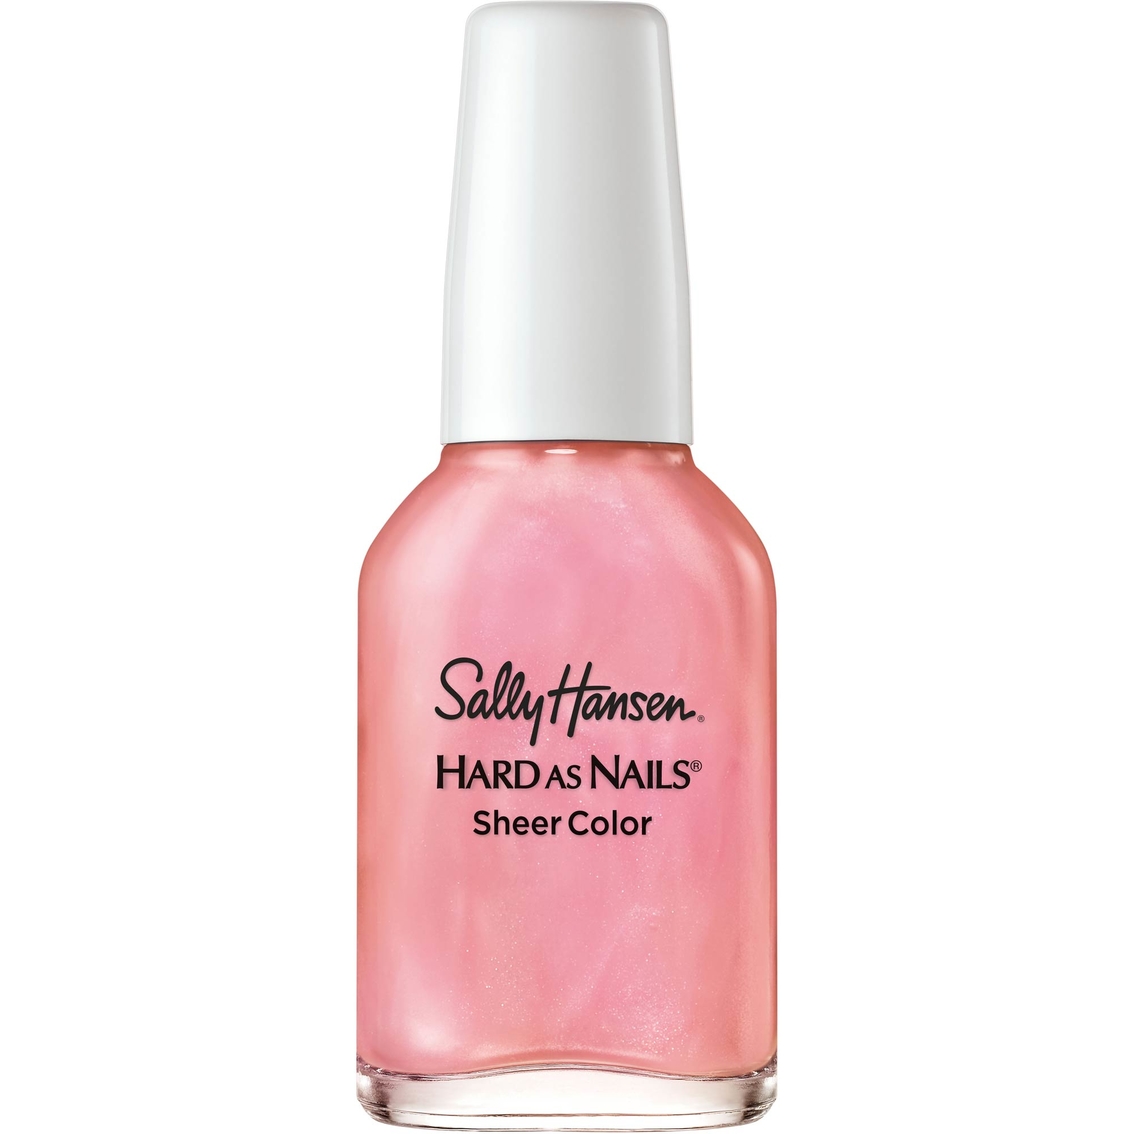 Sally Hansen Hard As Nails Sheerly Opal French Manicure Kit - Image 3 of 3